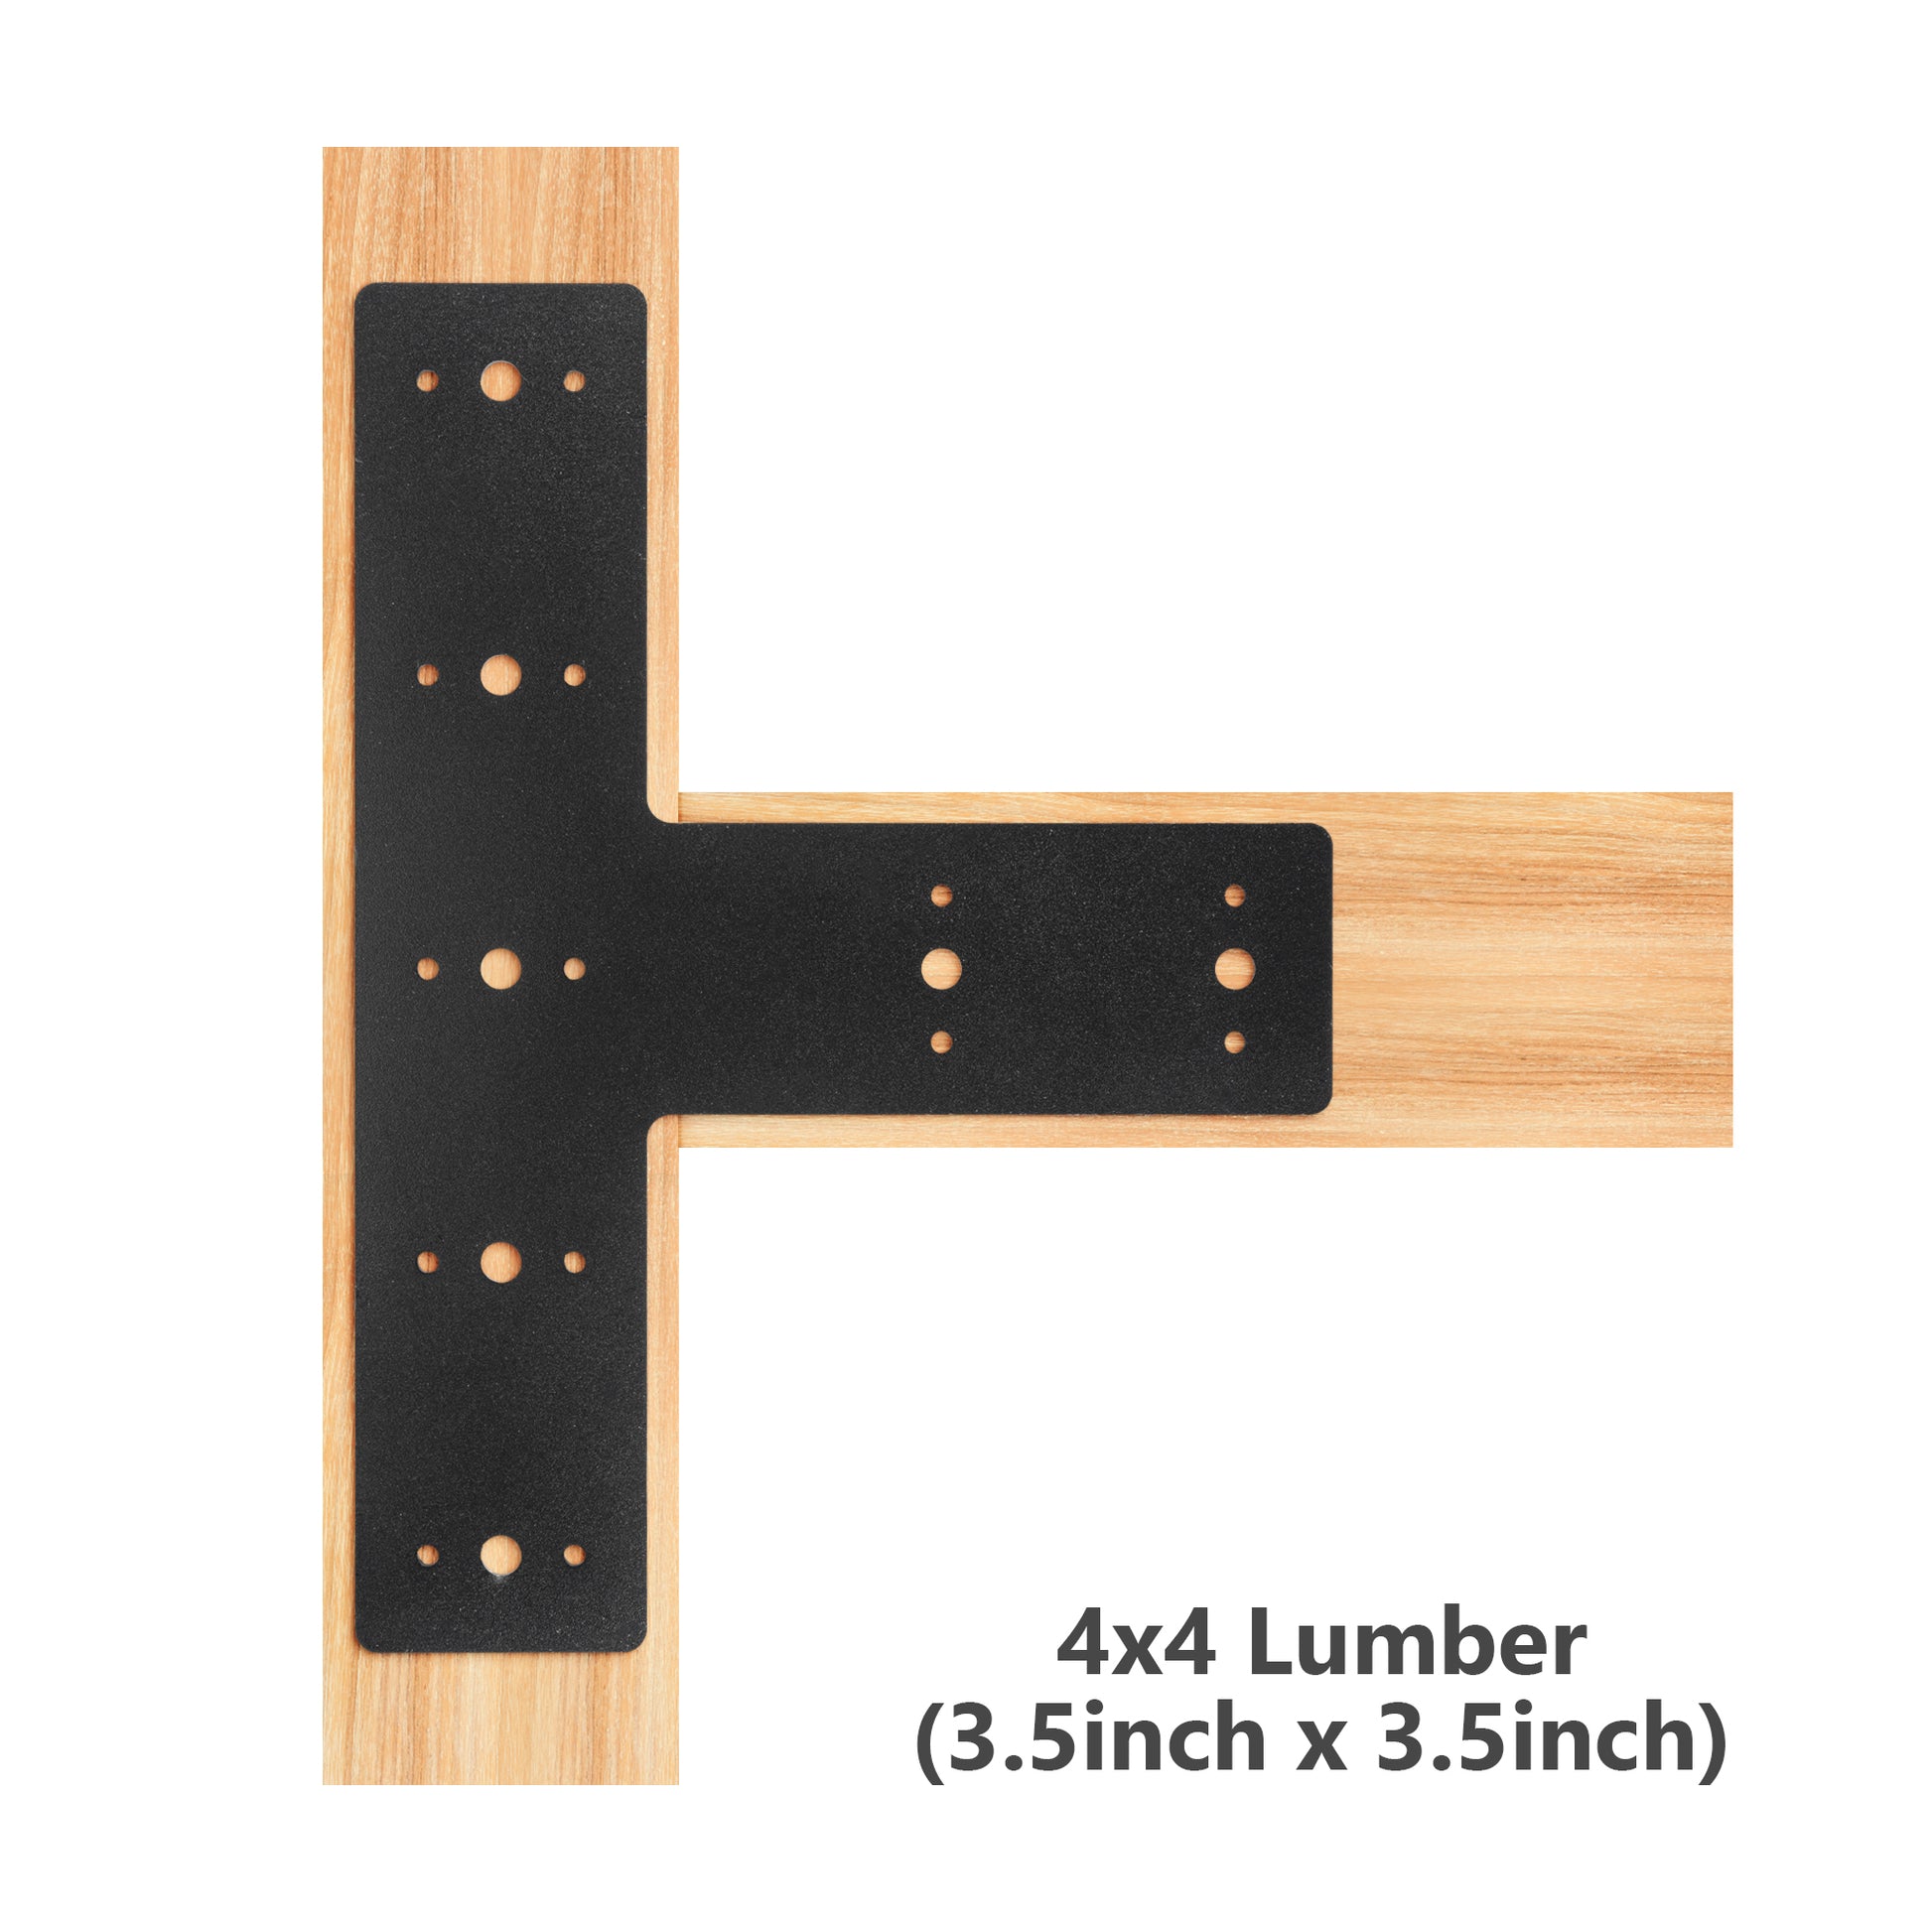 14 X 14 Heavy-Duty Cross Mending Plate (1 pc)- Structure Steel X T Plate,  Cross Tie Plate, Cross Bracing, Cross Flat Bracket, and Truss Connecting  Plate for Framing, Pergola, and Truss.: 